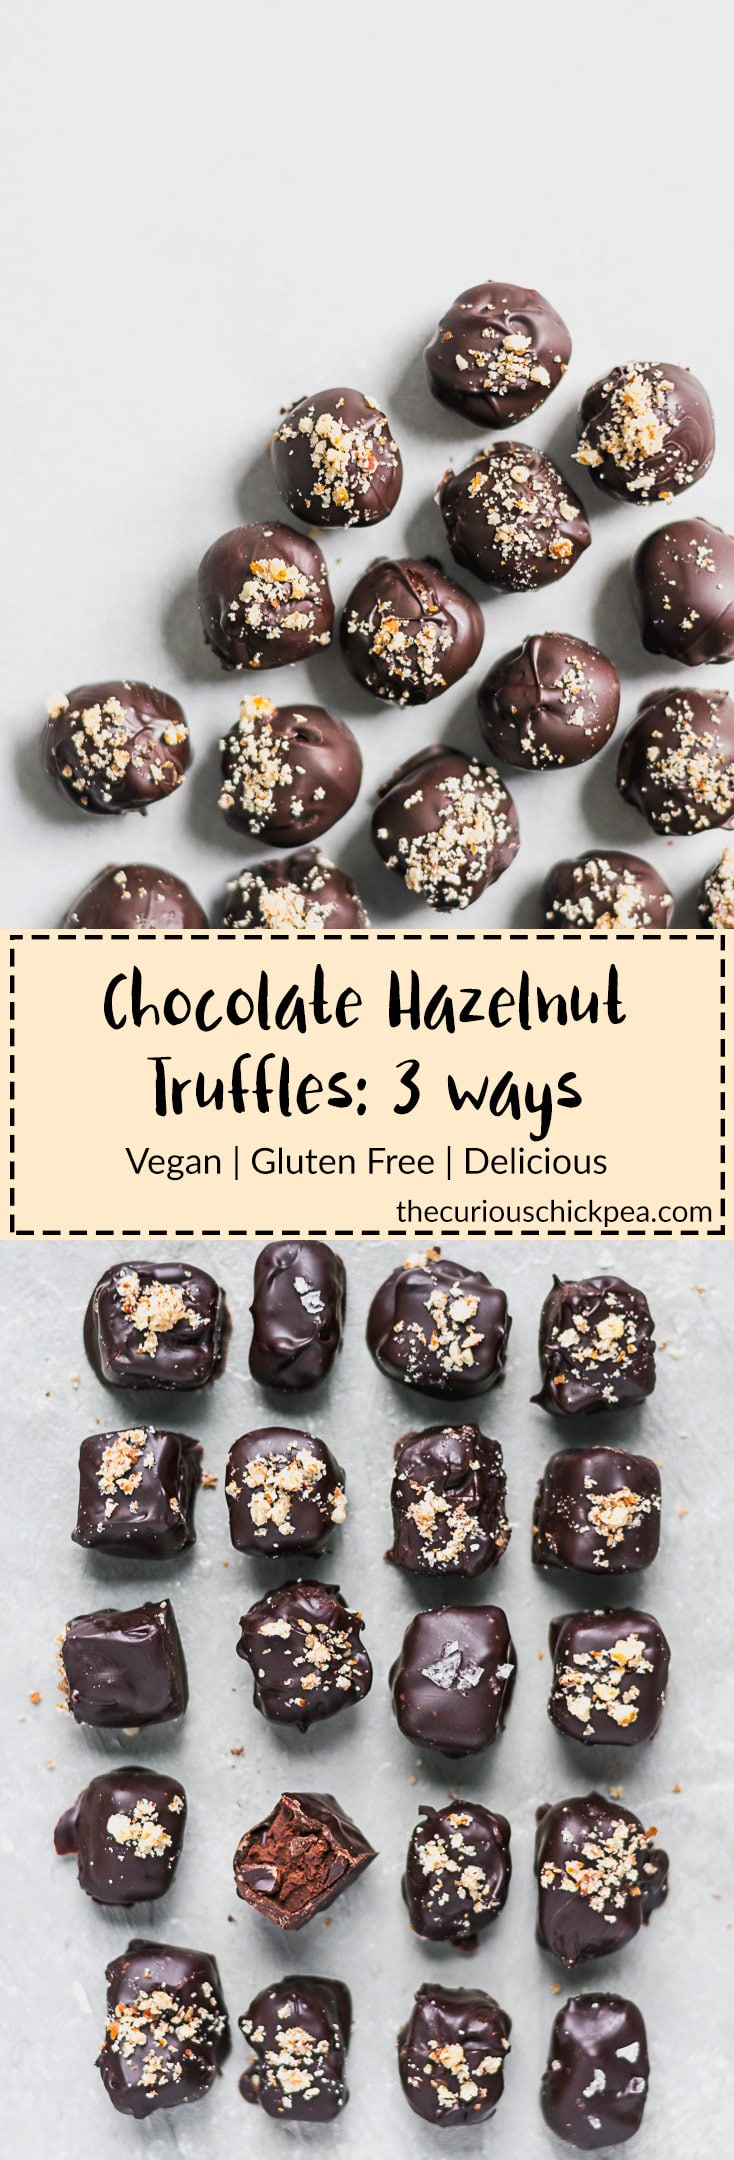 Chocolate Hazelnut Truffles: 3 ways | Vegan, Gluten Free, and Delicious. Learn to make your own chocolate truffles with a lusciously creamy hazelnut ganache center. Finish them in one of these ways: dipped in tempered chocolate for a shiny and crisp finish or dipped in melted chocolate and rolled in ground hazelnuts. You can even hide a toasted hazelnut in the center of the ganache! | thecuriouschickpea.com